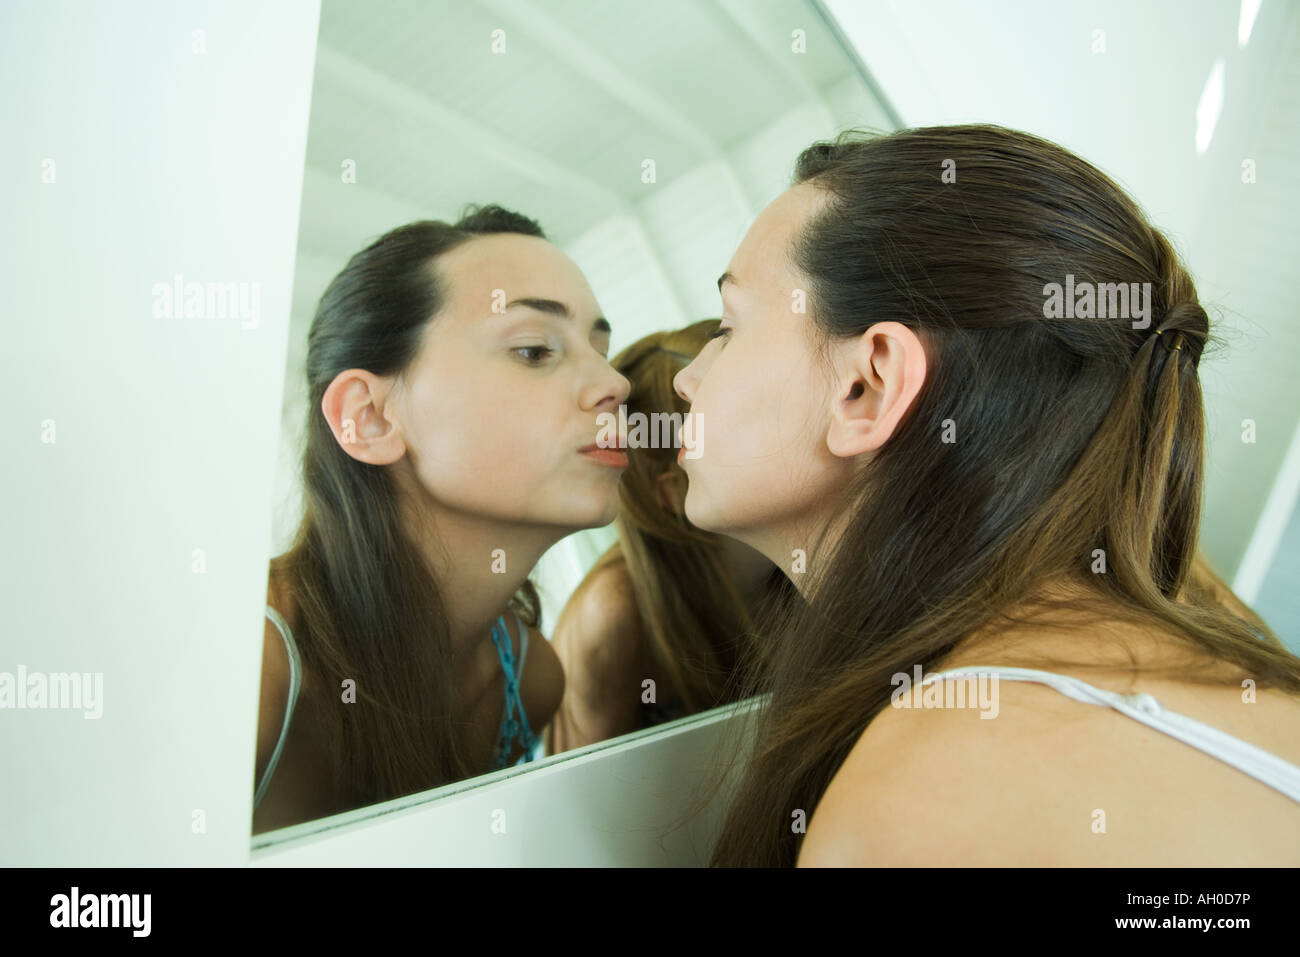 Teenage girl looking at self in mirror, kissing her reflection Stock Photo